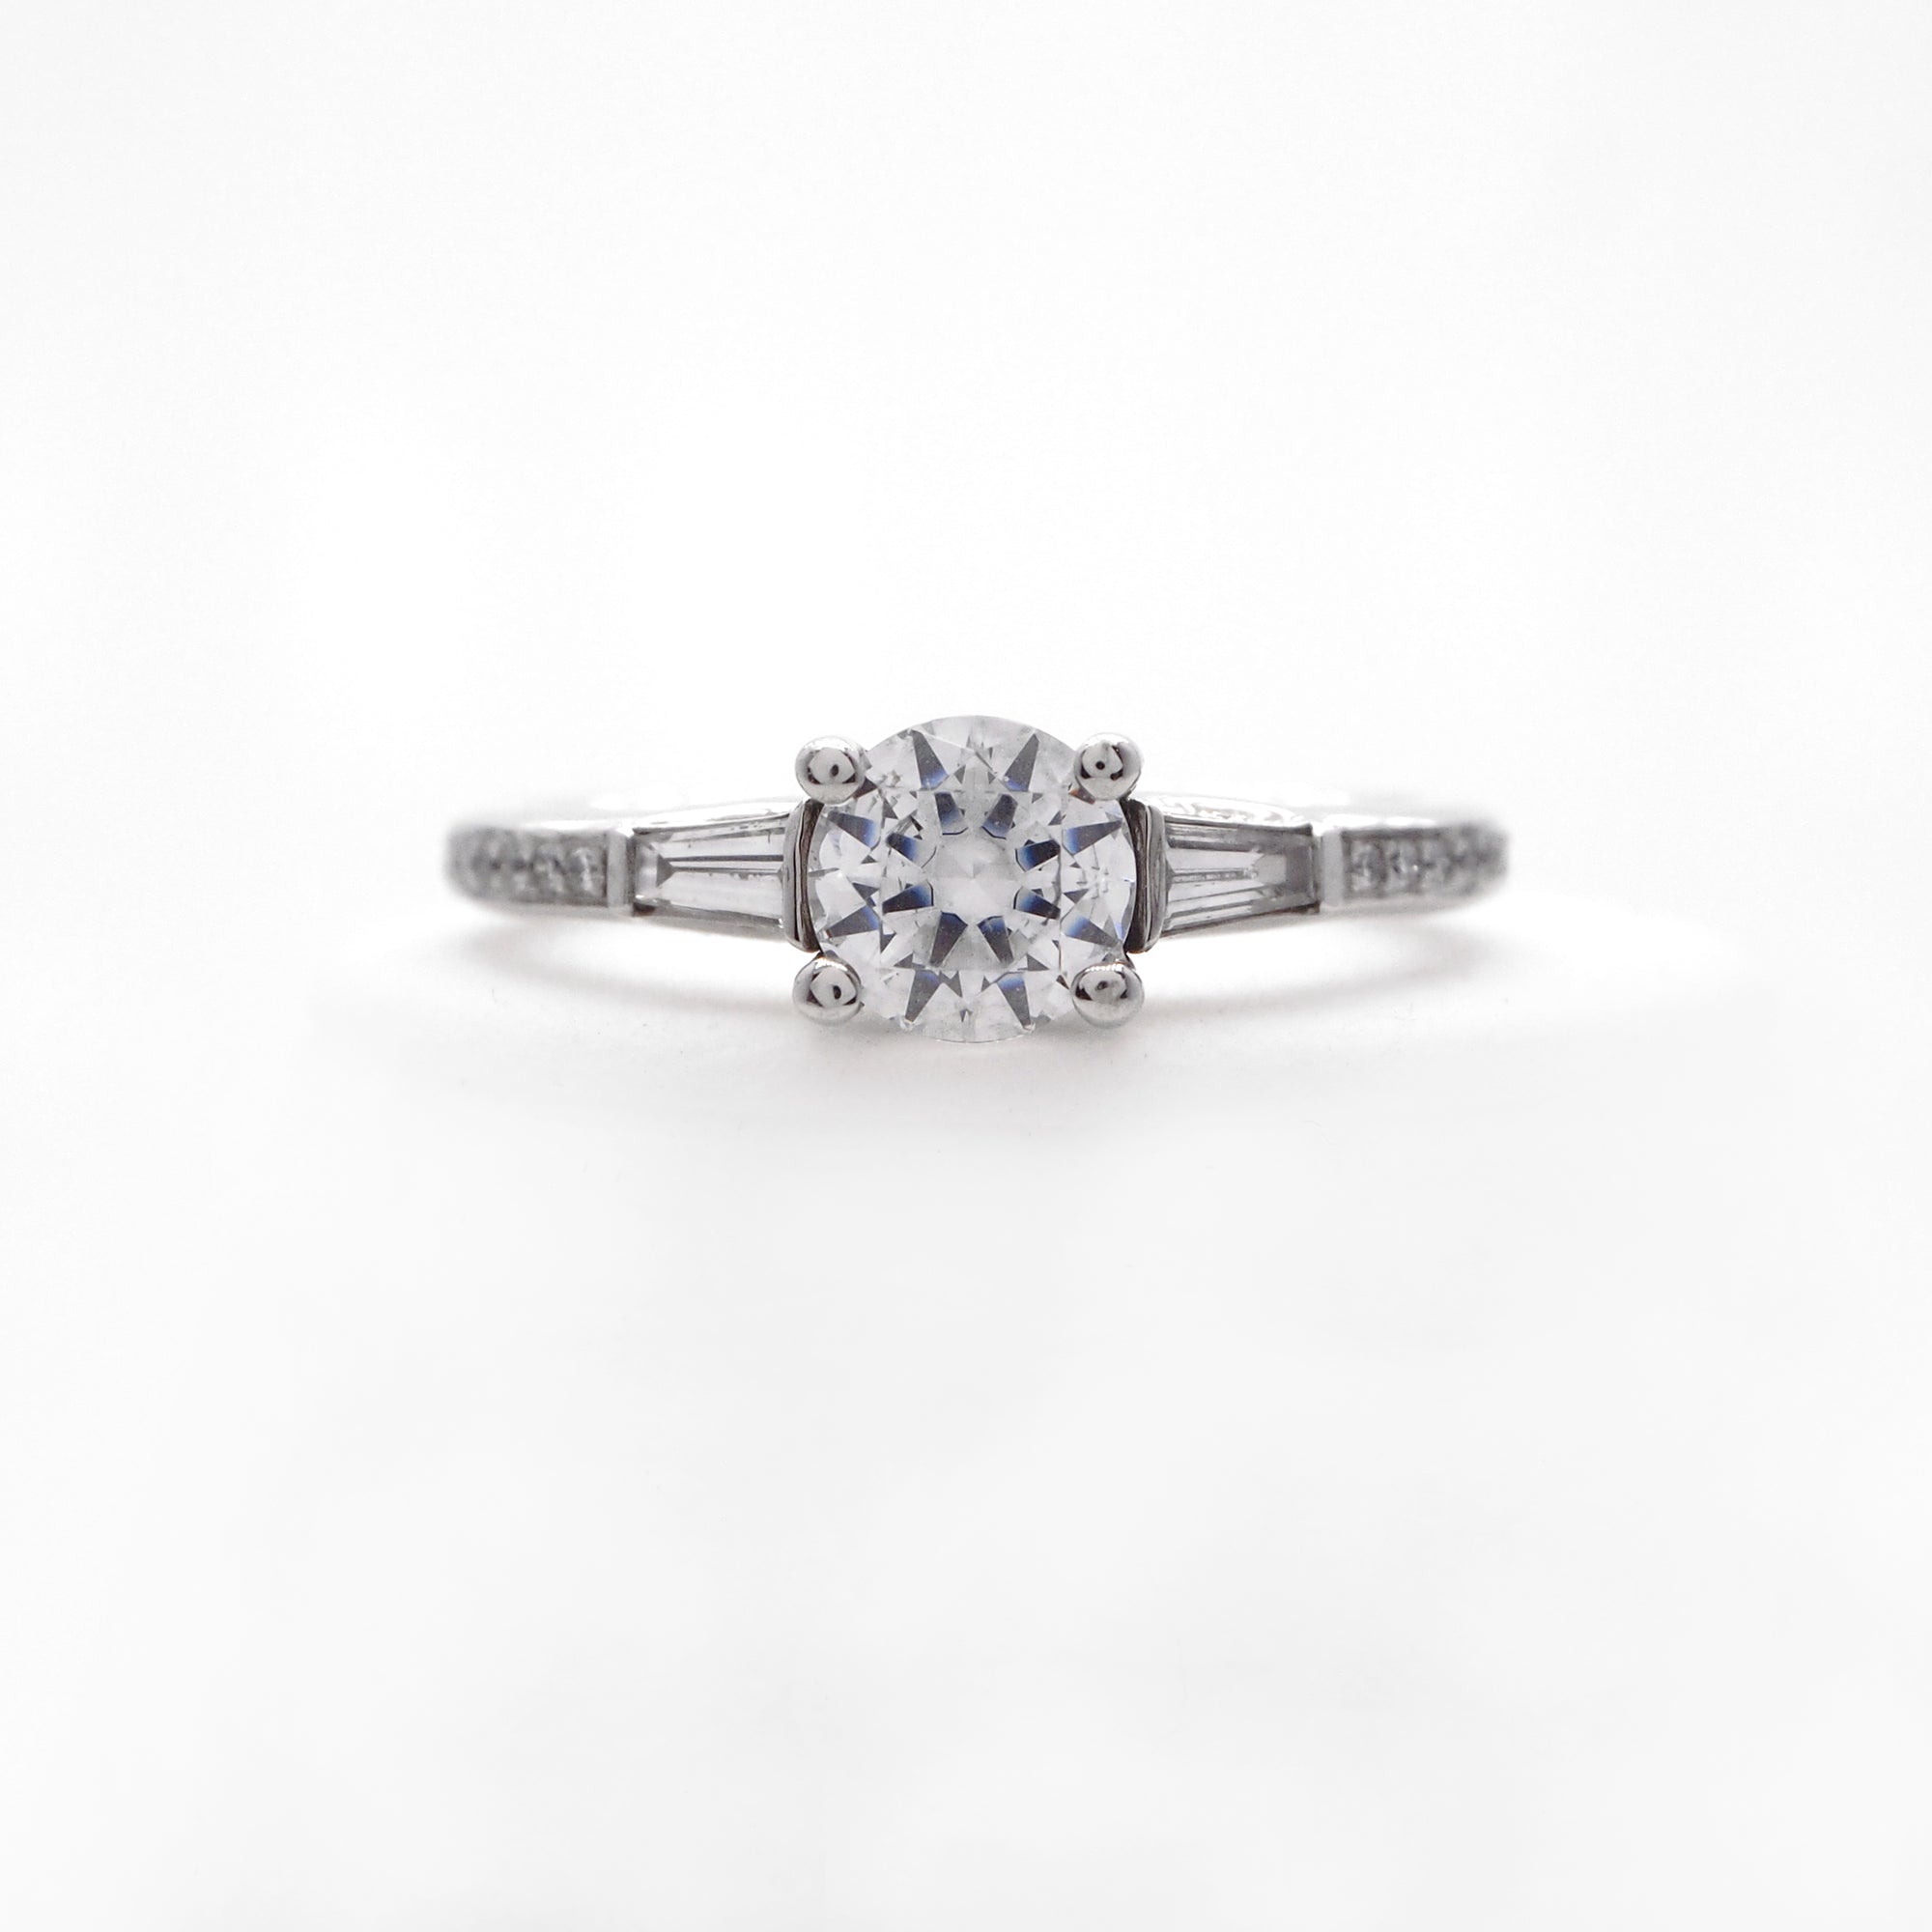 Platinum 3-stone diamond engagement ring featuring two baguette diamonds weighing a total of 0.18 carats, and round brilliant diamonds weighing a total of 0.11 carats. 